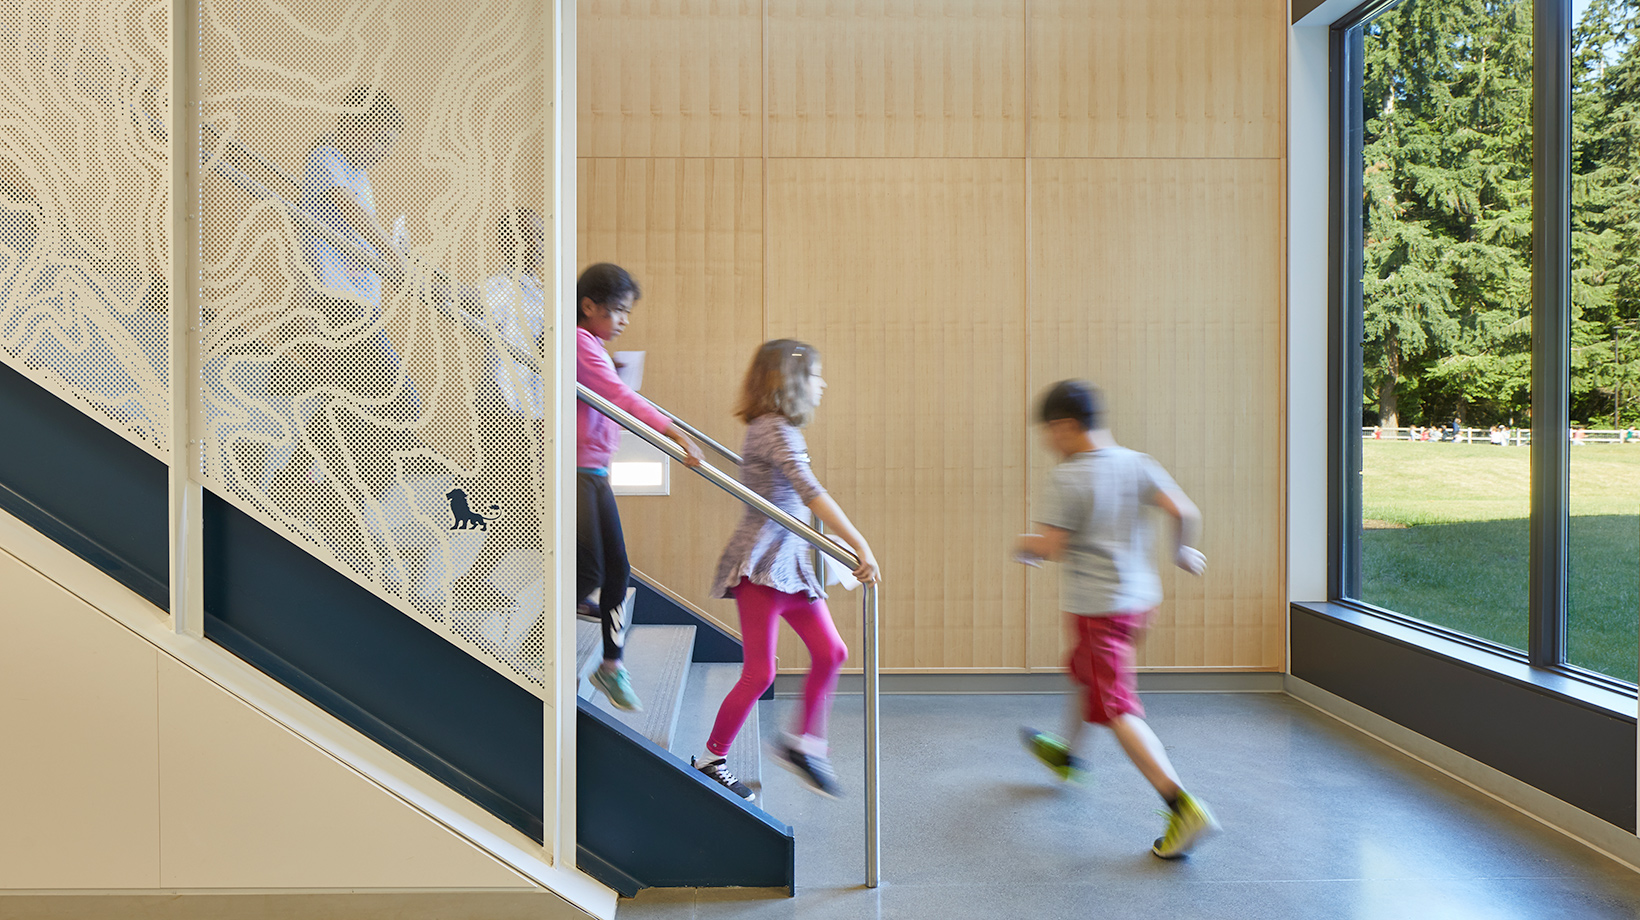 Children coming down an interior stair with a view to outside